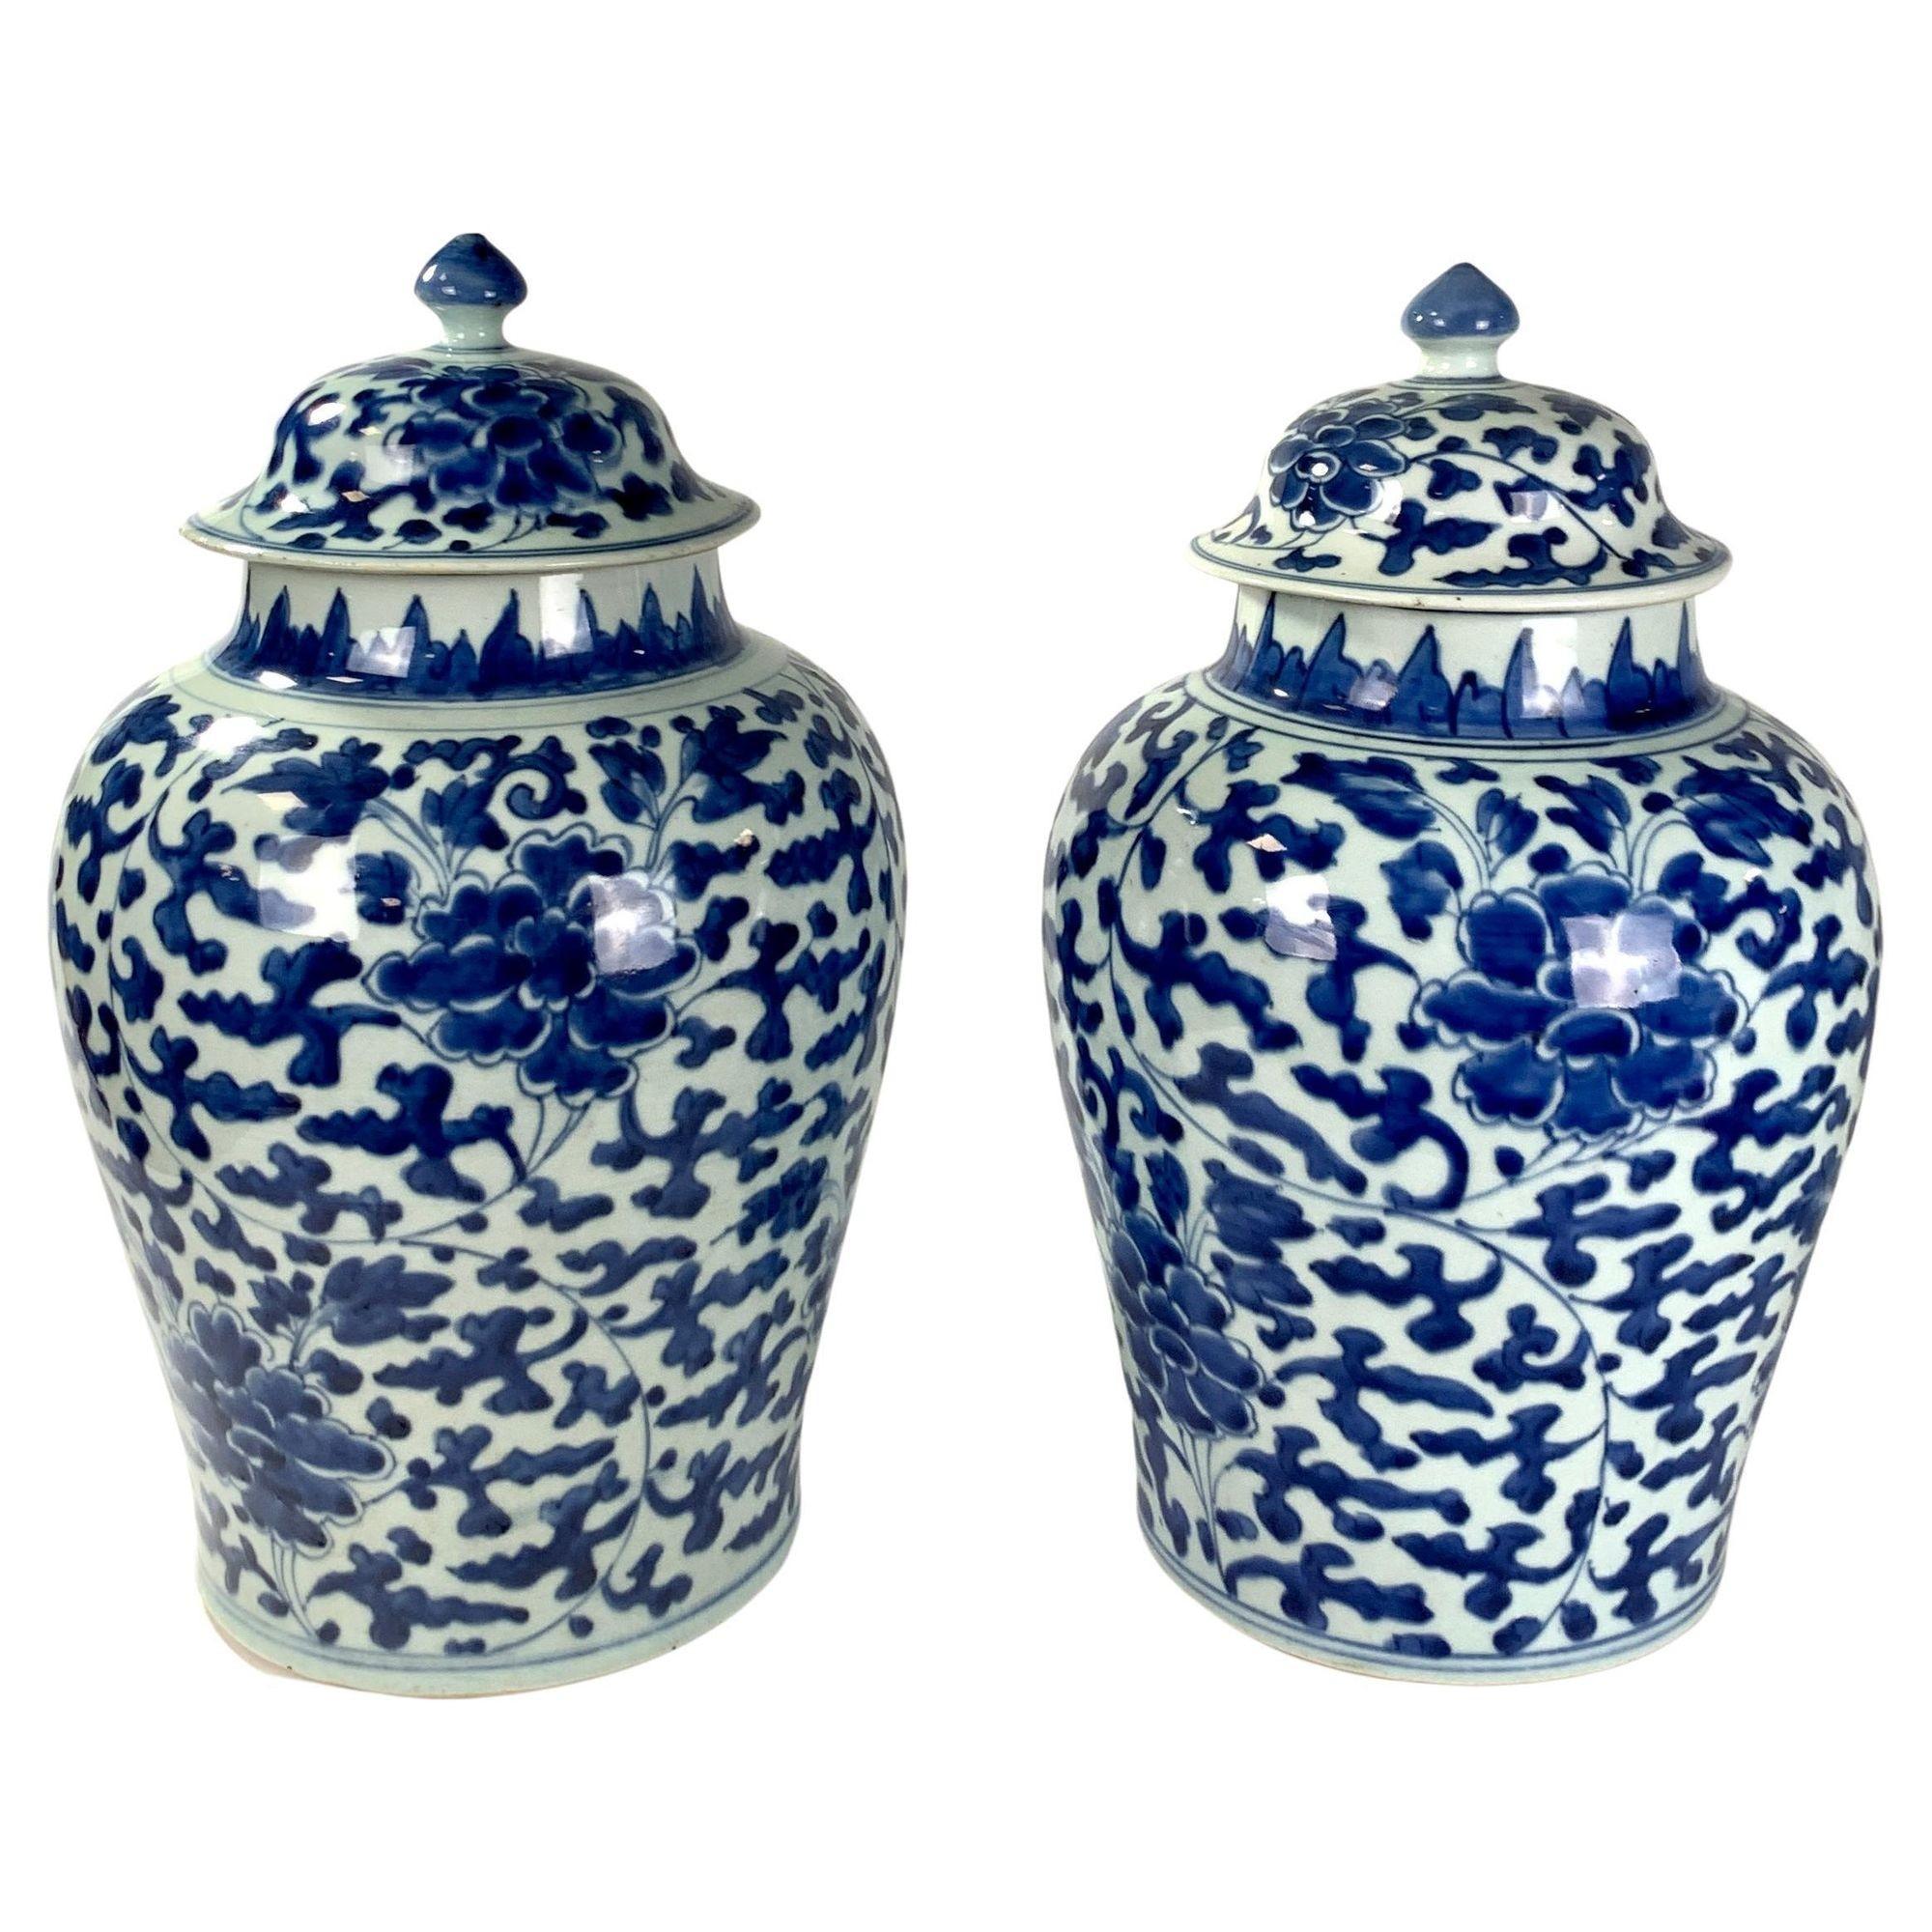 This exceptional pair of Chinese porcelain jars were made circa 1700 in the reign of Emperor Kangxi.
The jars are magnificent on display. They catch your eye from across the room and won't let go.
They are hand-painted in exquisite cobalt blue.